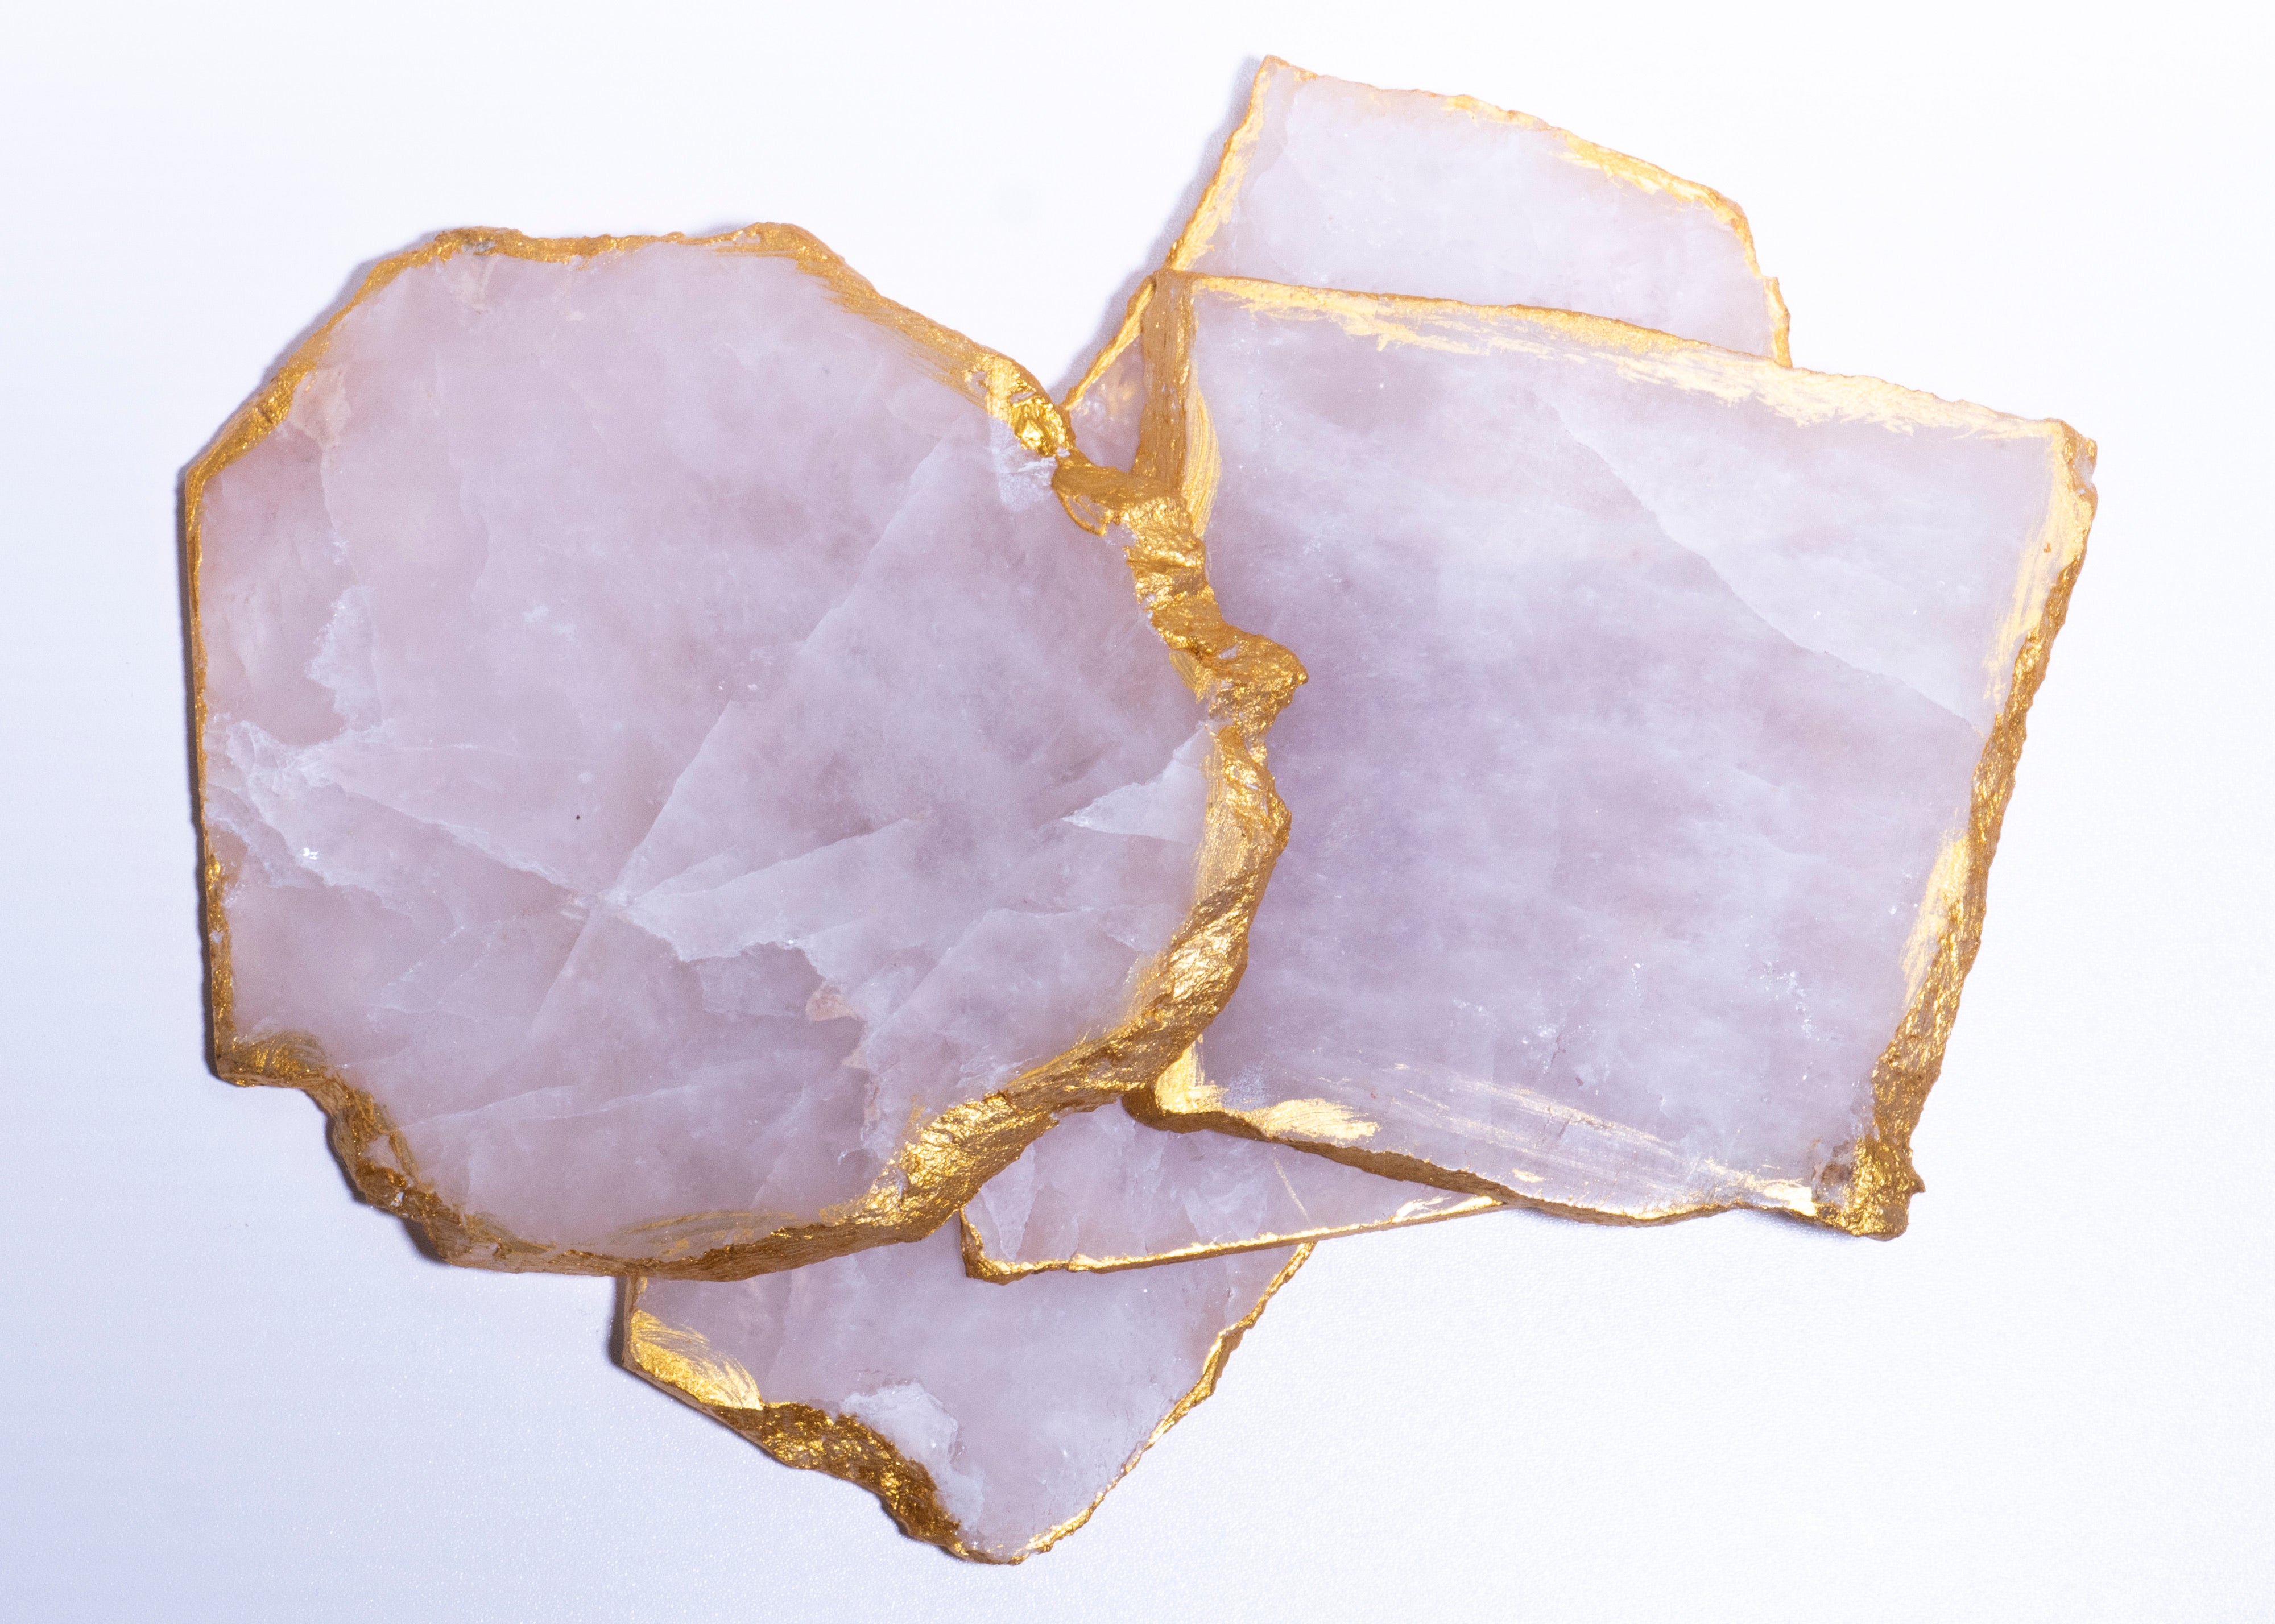 Trimmed in electroplated gold, rose quartz coasters exude luxury.